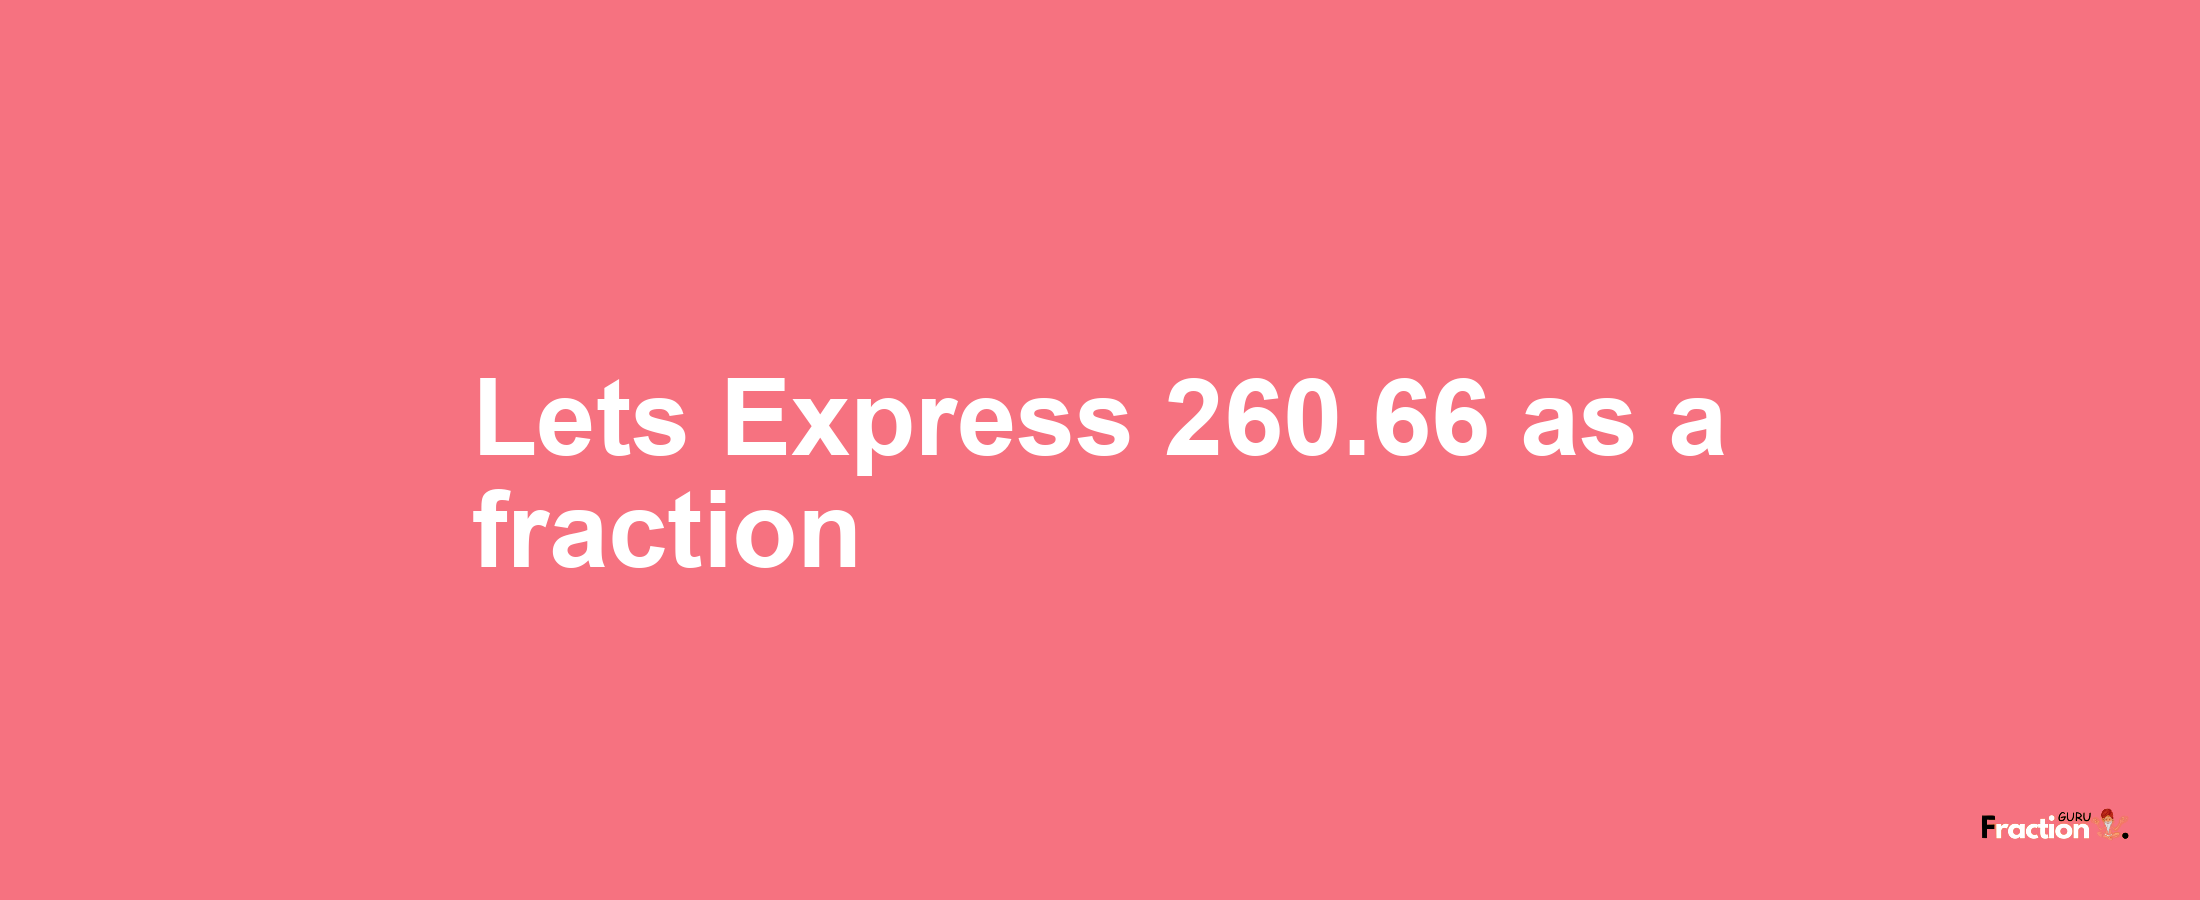 Lets Express 260.66 as afraction